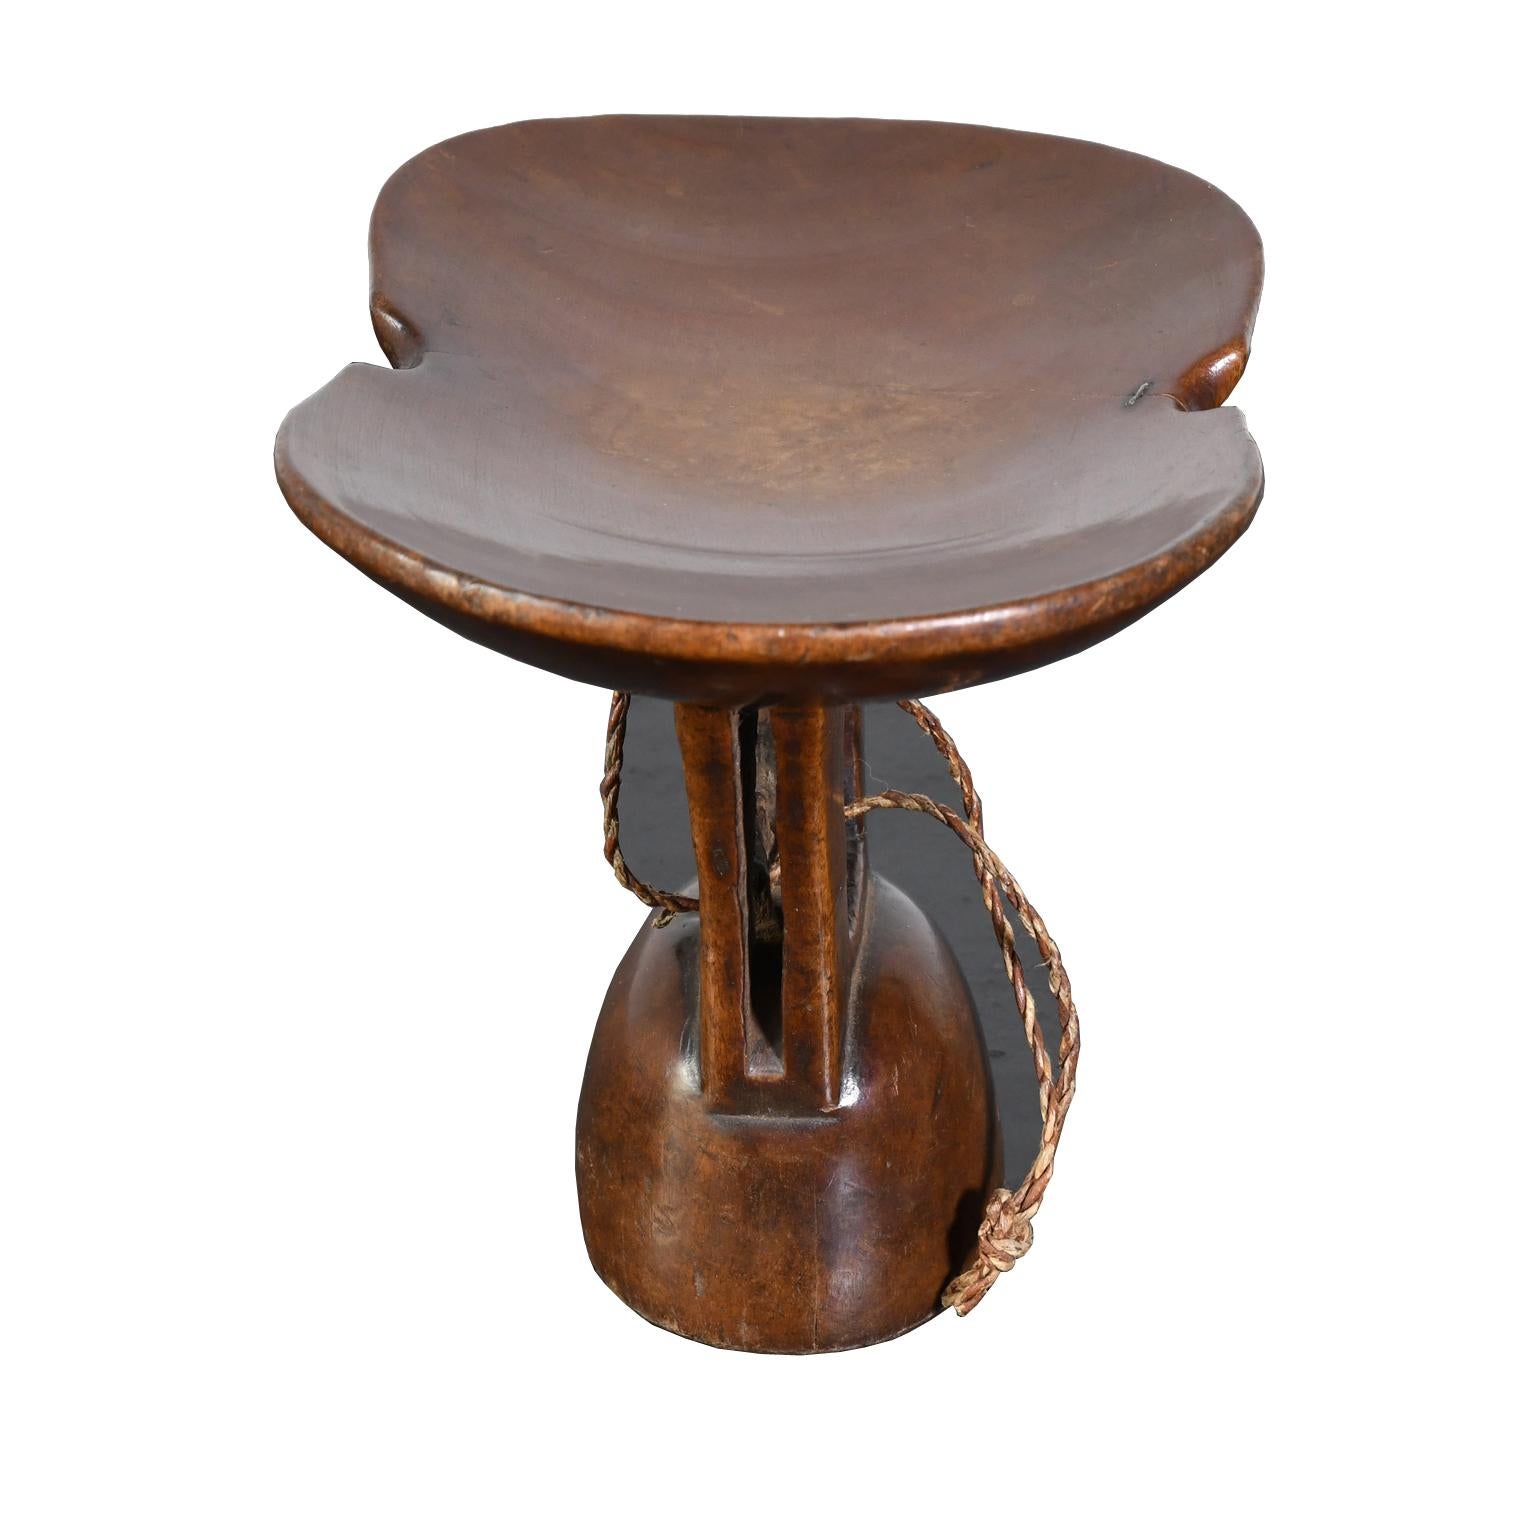 An Ethiopian headrest carved out of a single piece of wood in a medium chocolate-colored wood similar to walnut with a beautiful burnished patina. It was made as a utilitarian object for everyday use in tribal life (and not made as an artifact for